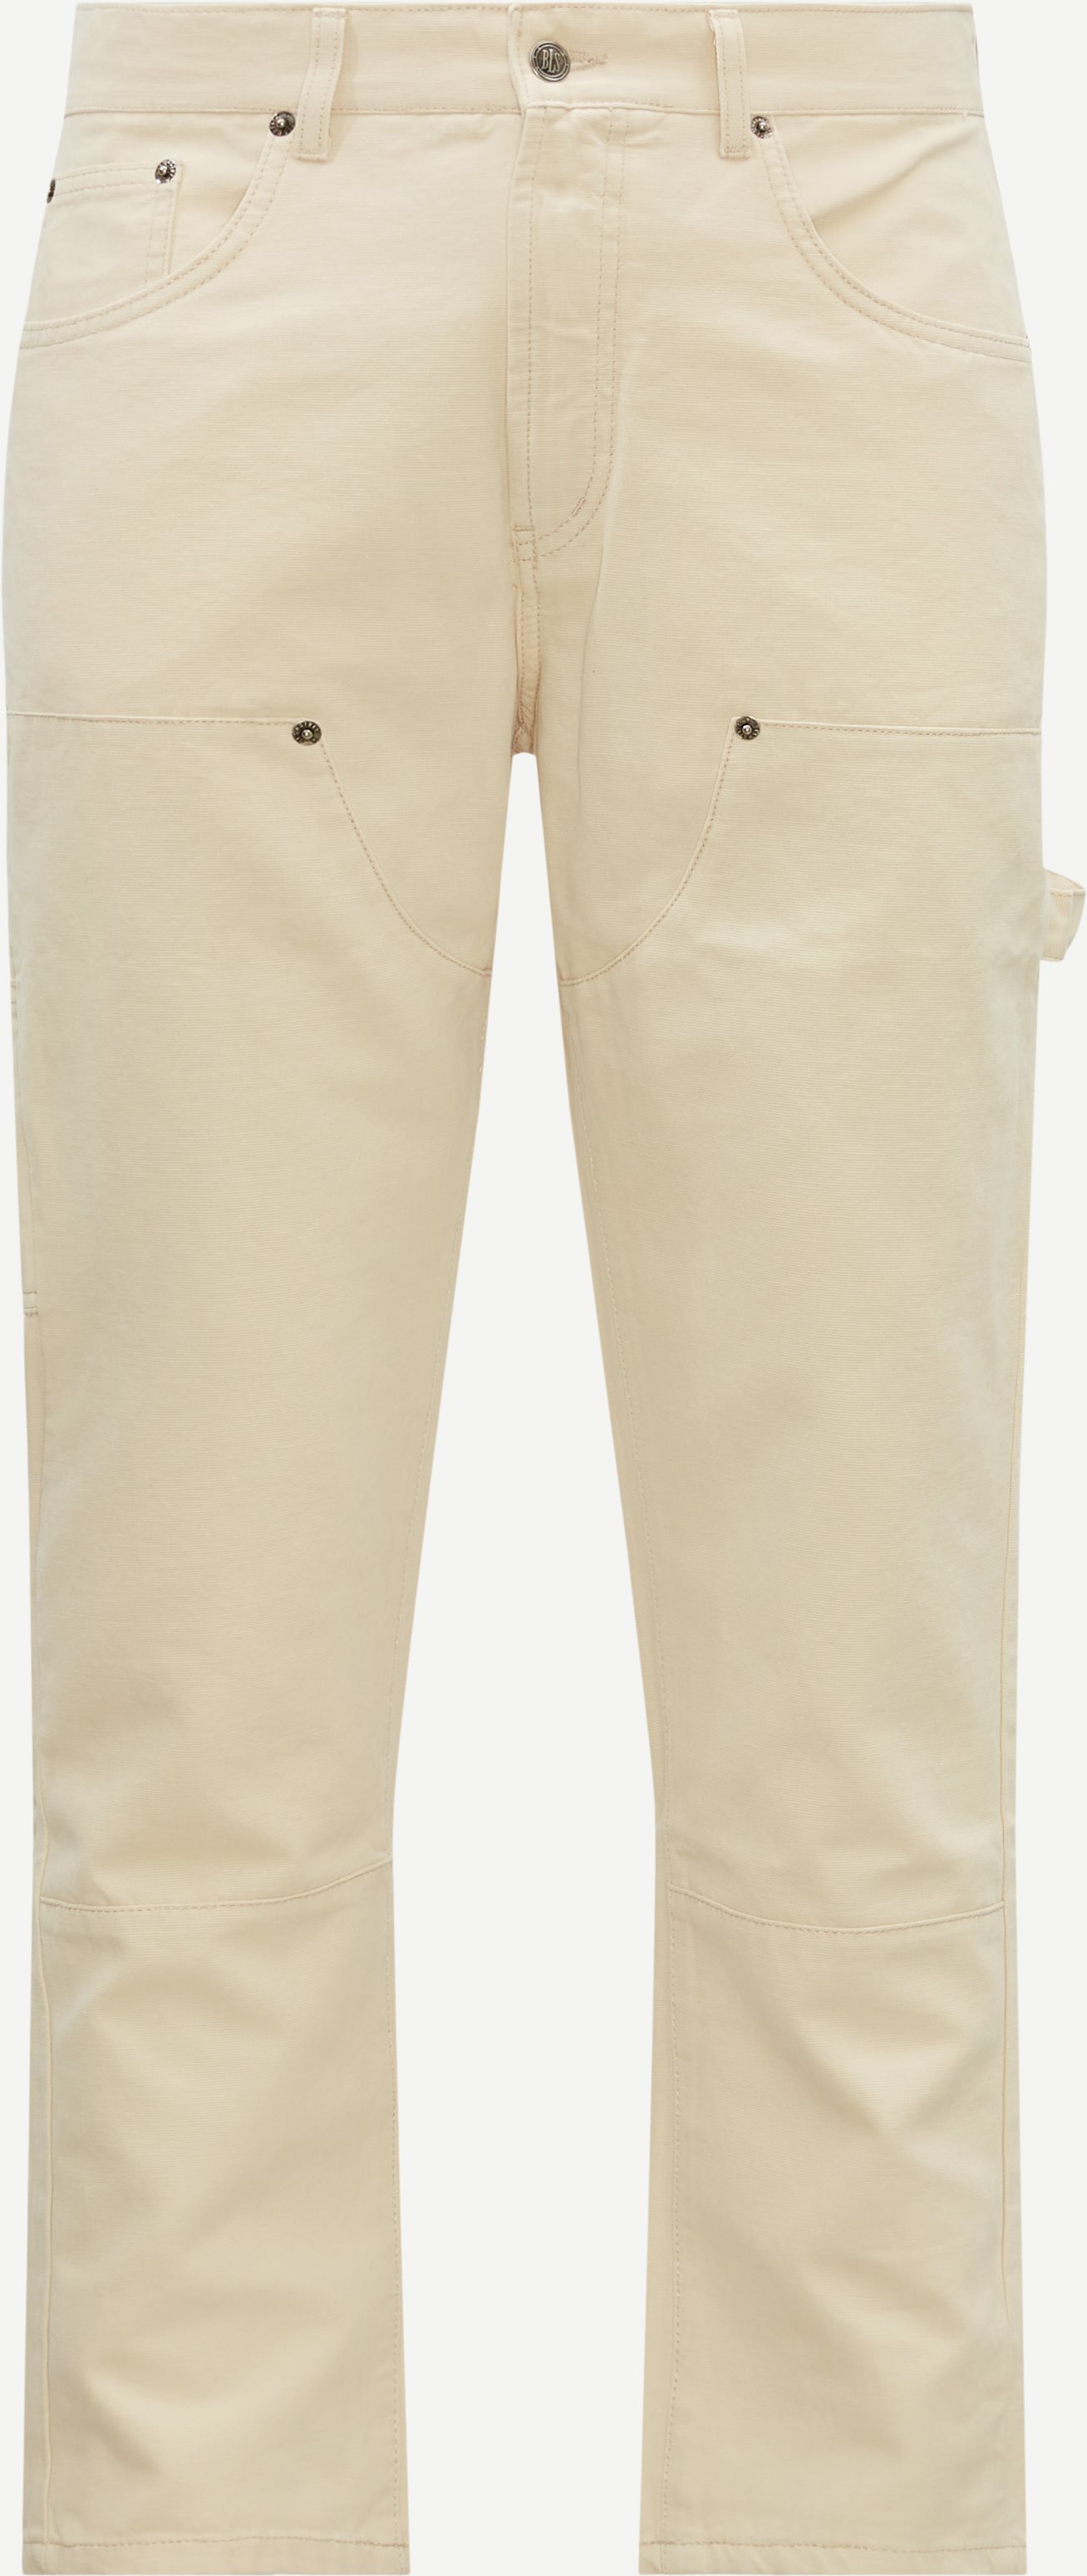 BLS Jeans WORK WEAR PANT Sand